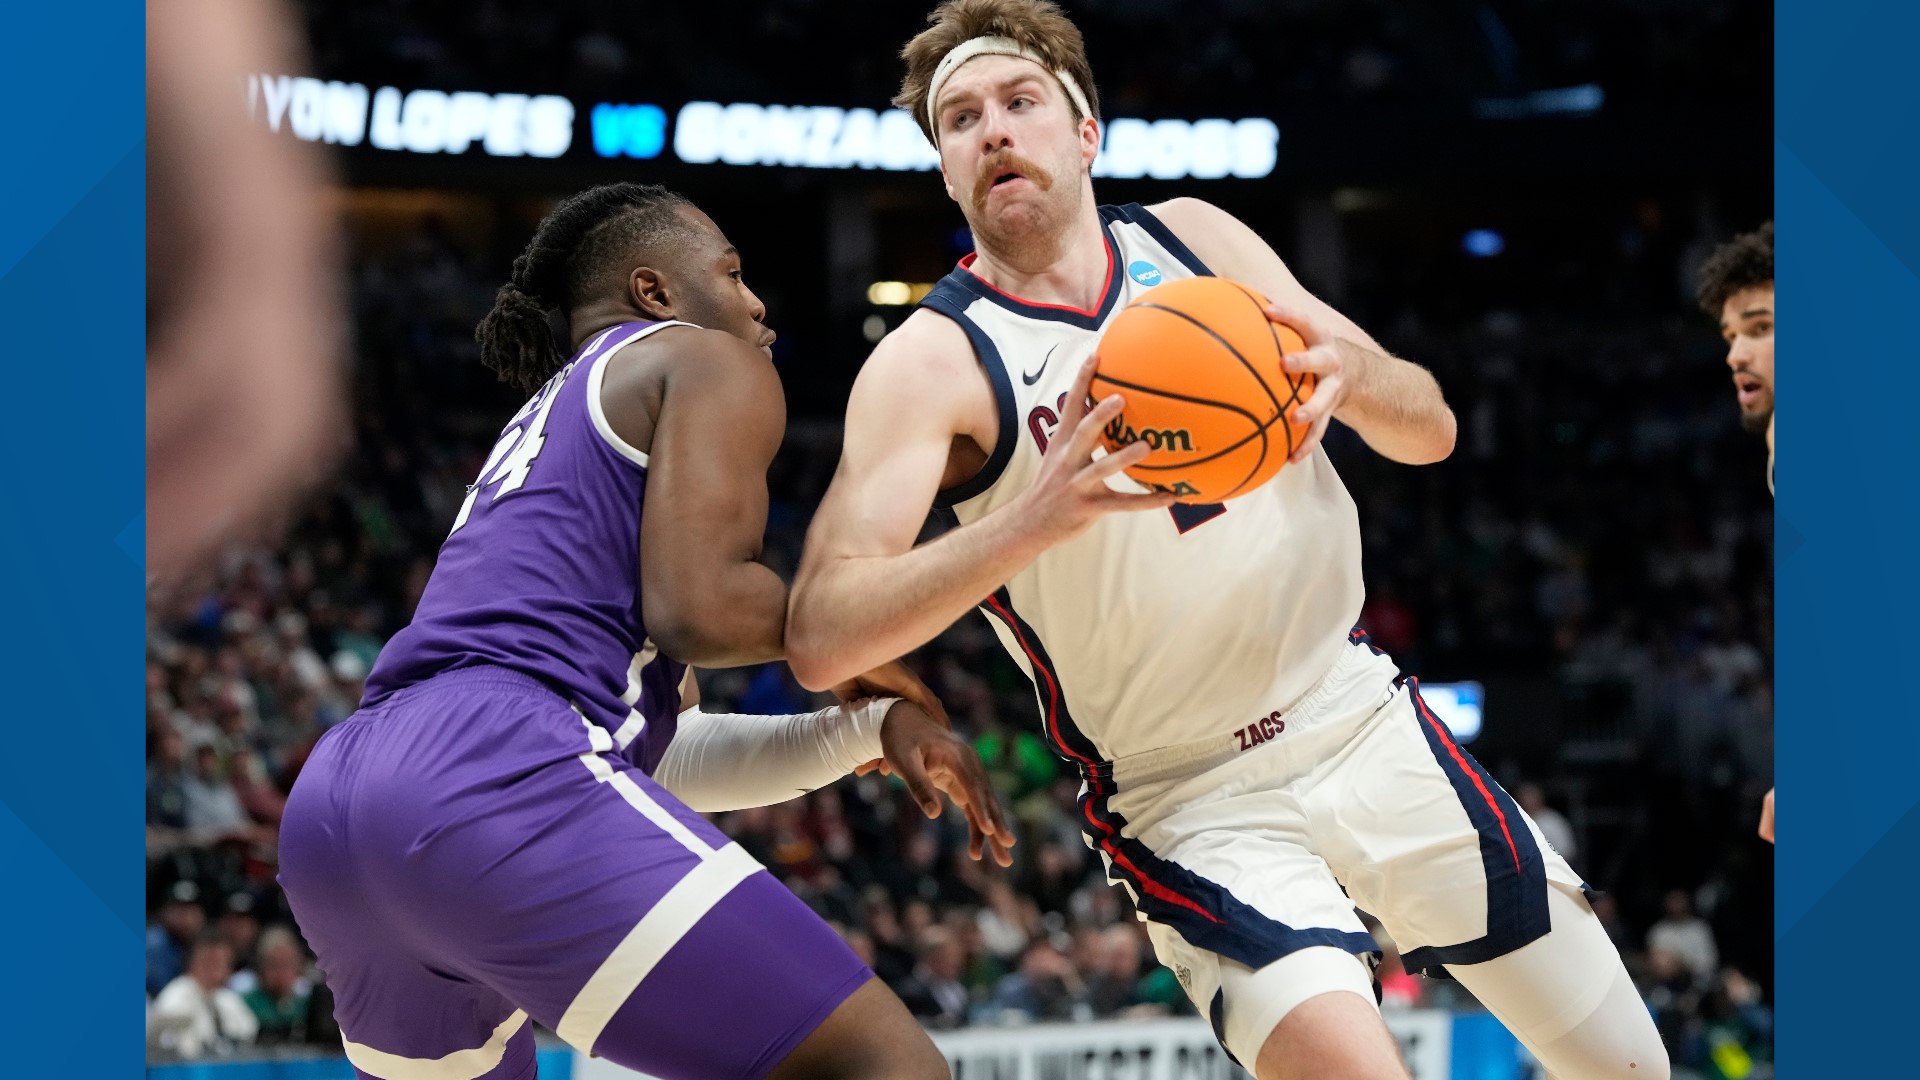 Slow-starting Gonzaga finally started playing like a title contender, then wore out Grand Canyon 82-70 behind 28 points and 10 rebounds from Julian Strawther.